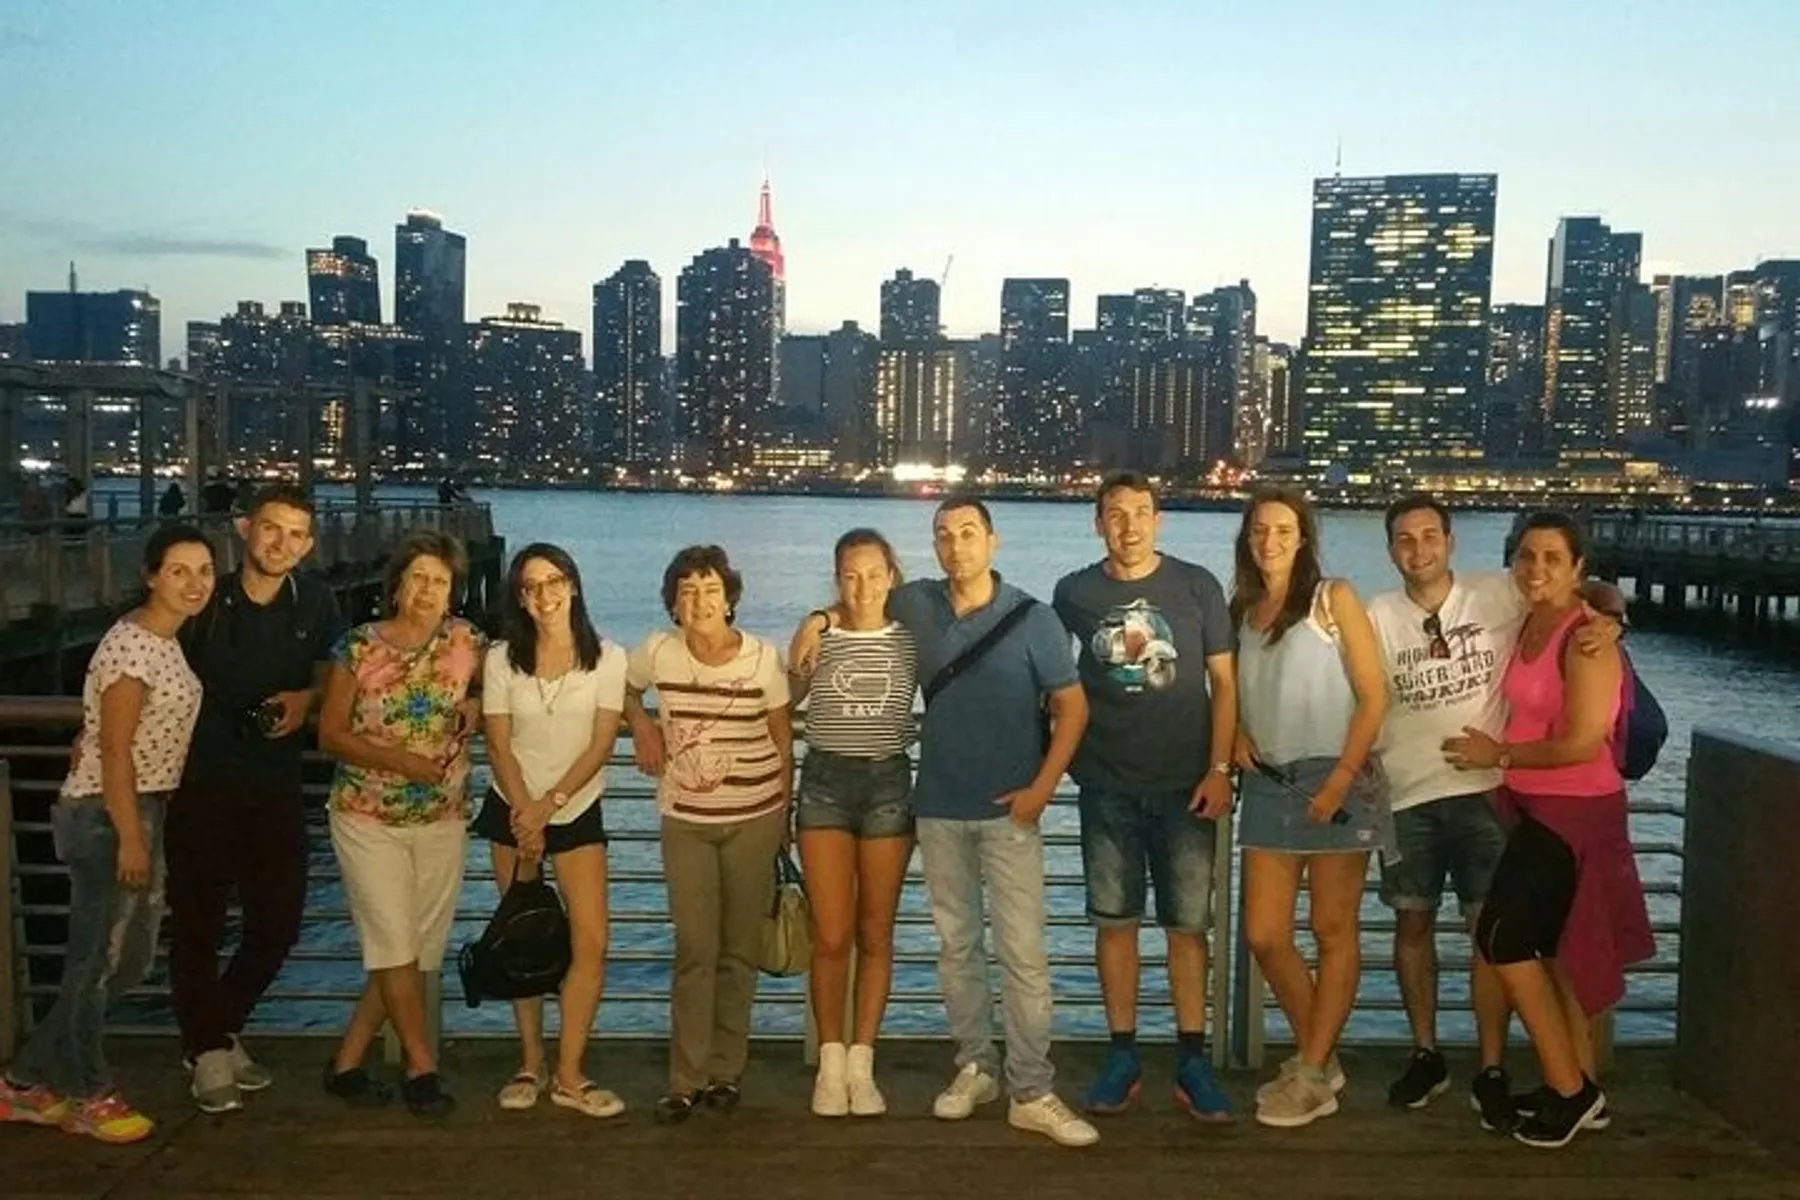 A group of people is posing for a photo on a waterfront with a city skyline illuminated at dusk in the background.